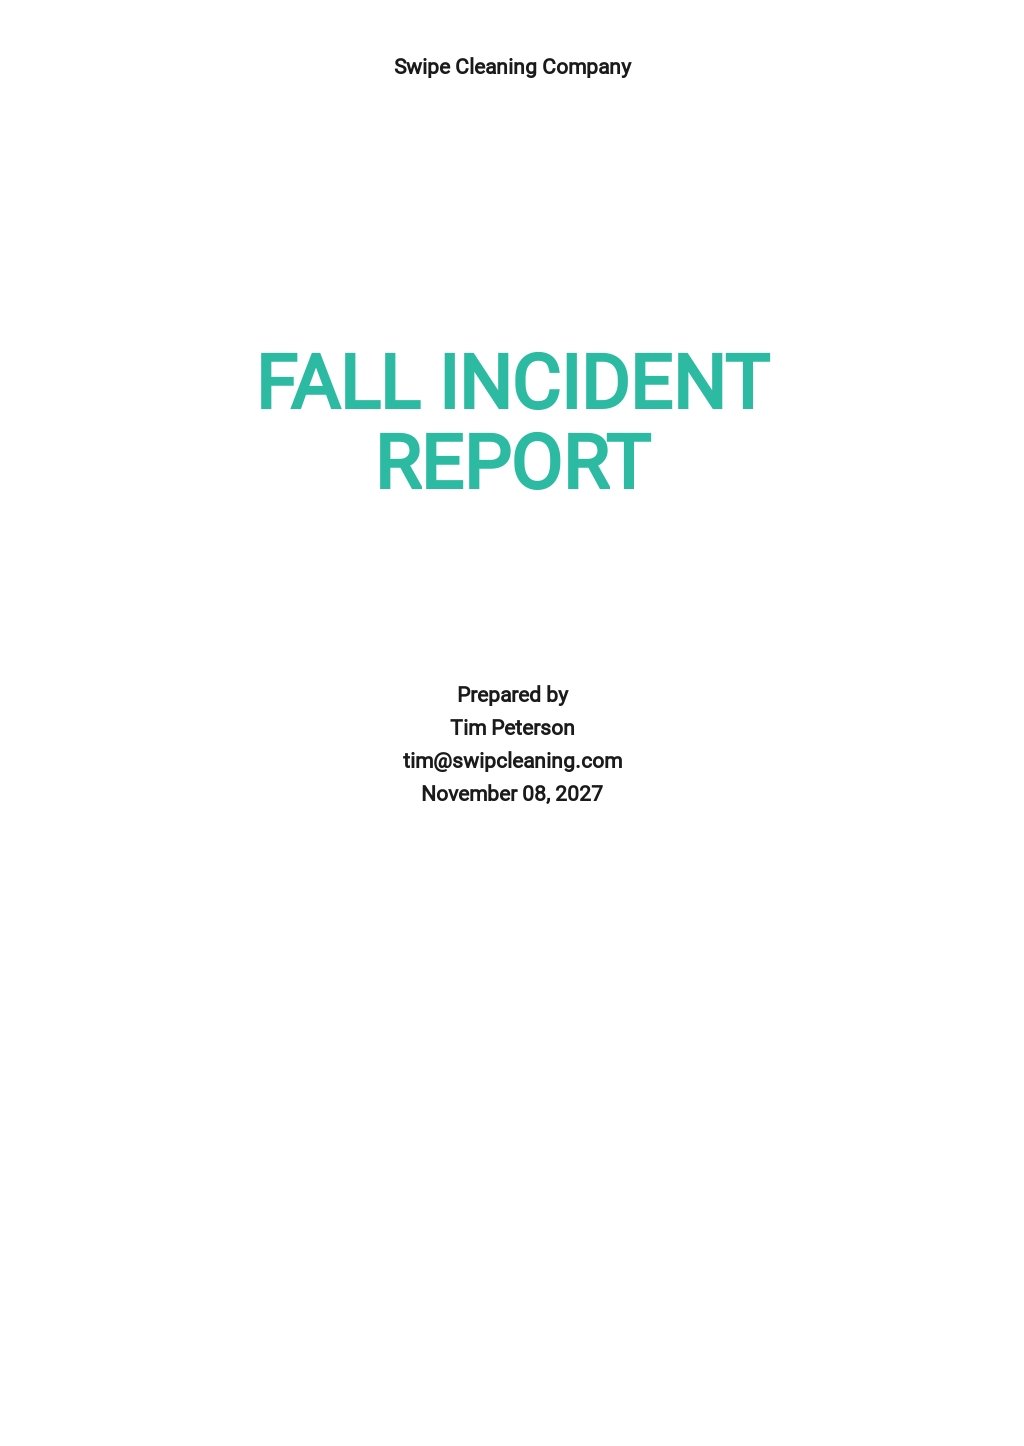 Fall Incident Report Sample Master Template Bank2home com